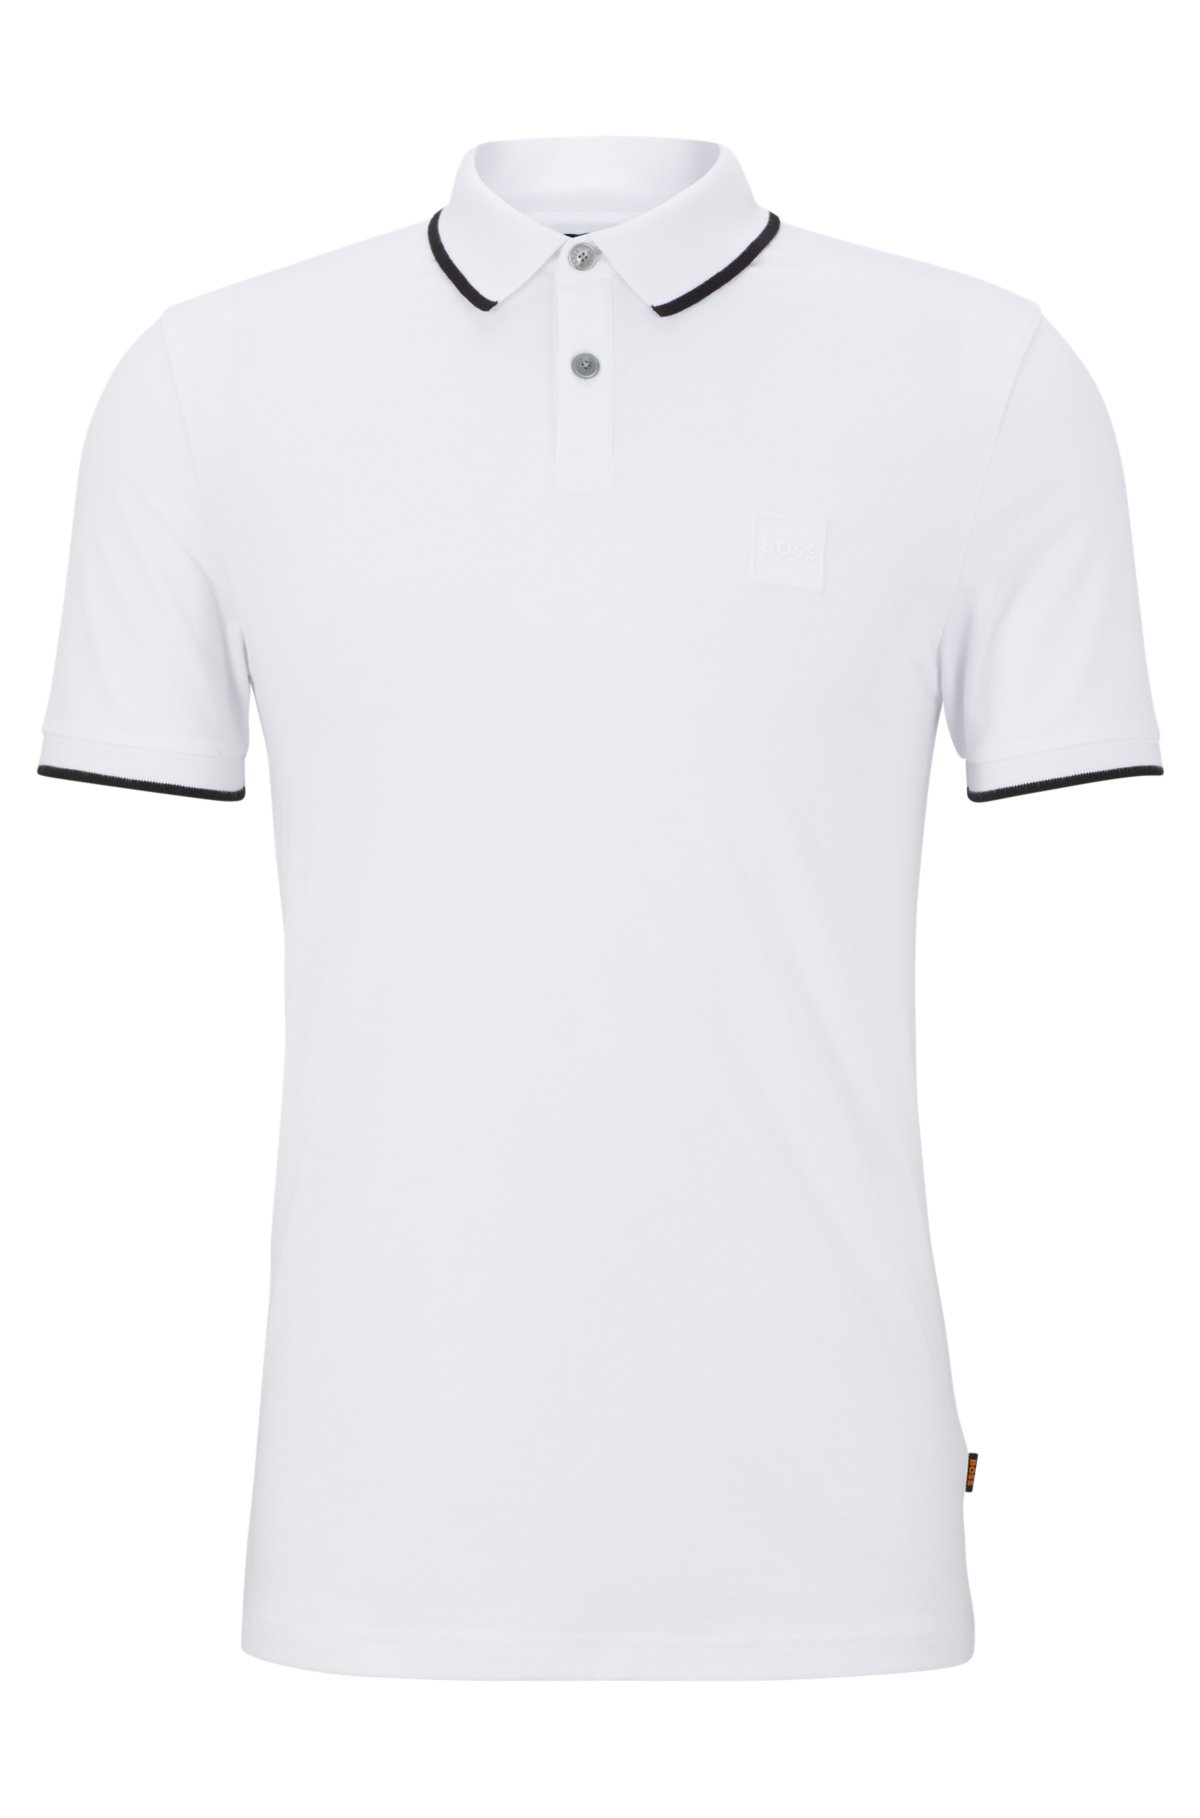 BOSS - Long-sleeved slim-fit polo shirt with logo patch